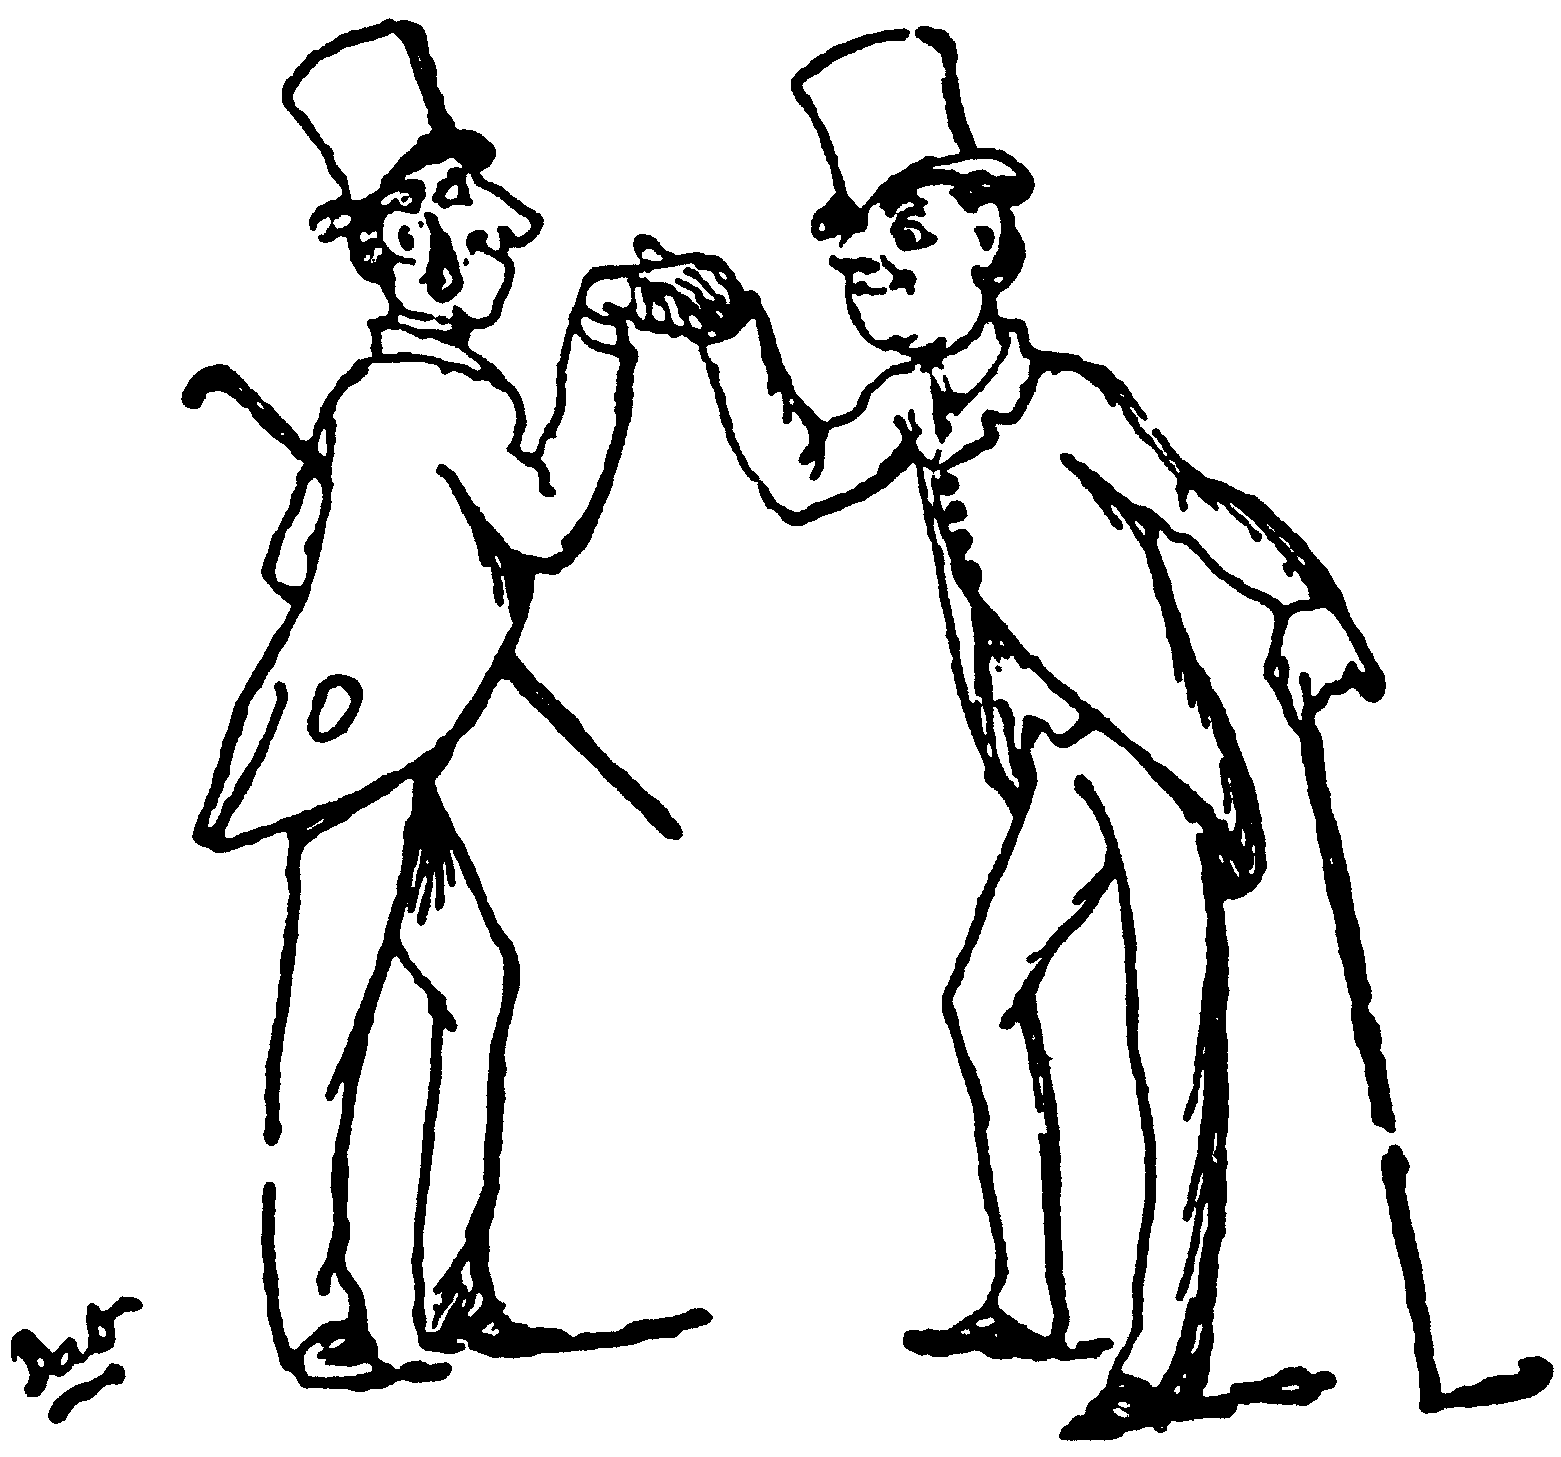 Two People Shaking Hands - ClipArt Best